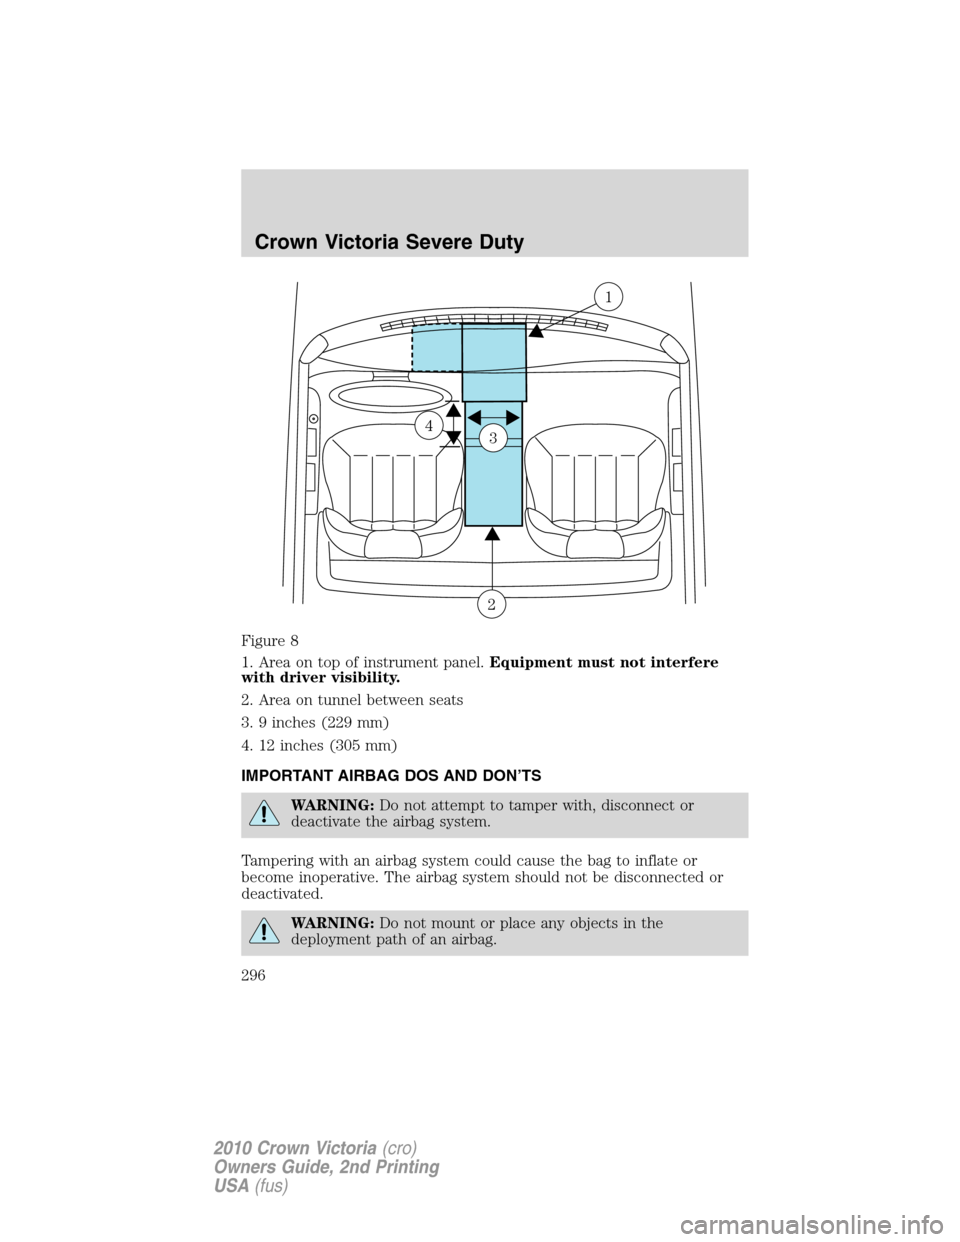 FORD CROWN VICTORIA 2010 2.G Owners Manual Figure 8
1. Area on top of instrument panel.Equipment must not interfere
with driver visibility.
2. Area on tunnel between seats
3. 9 inches (229 mm)
4. 12 inches (305 mm)
IMPORTANT AIRBAG DOS AND DON